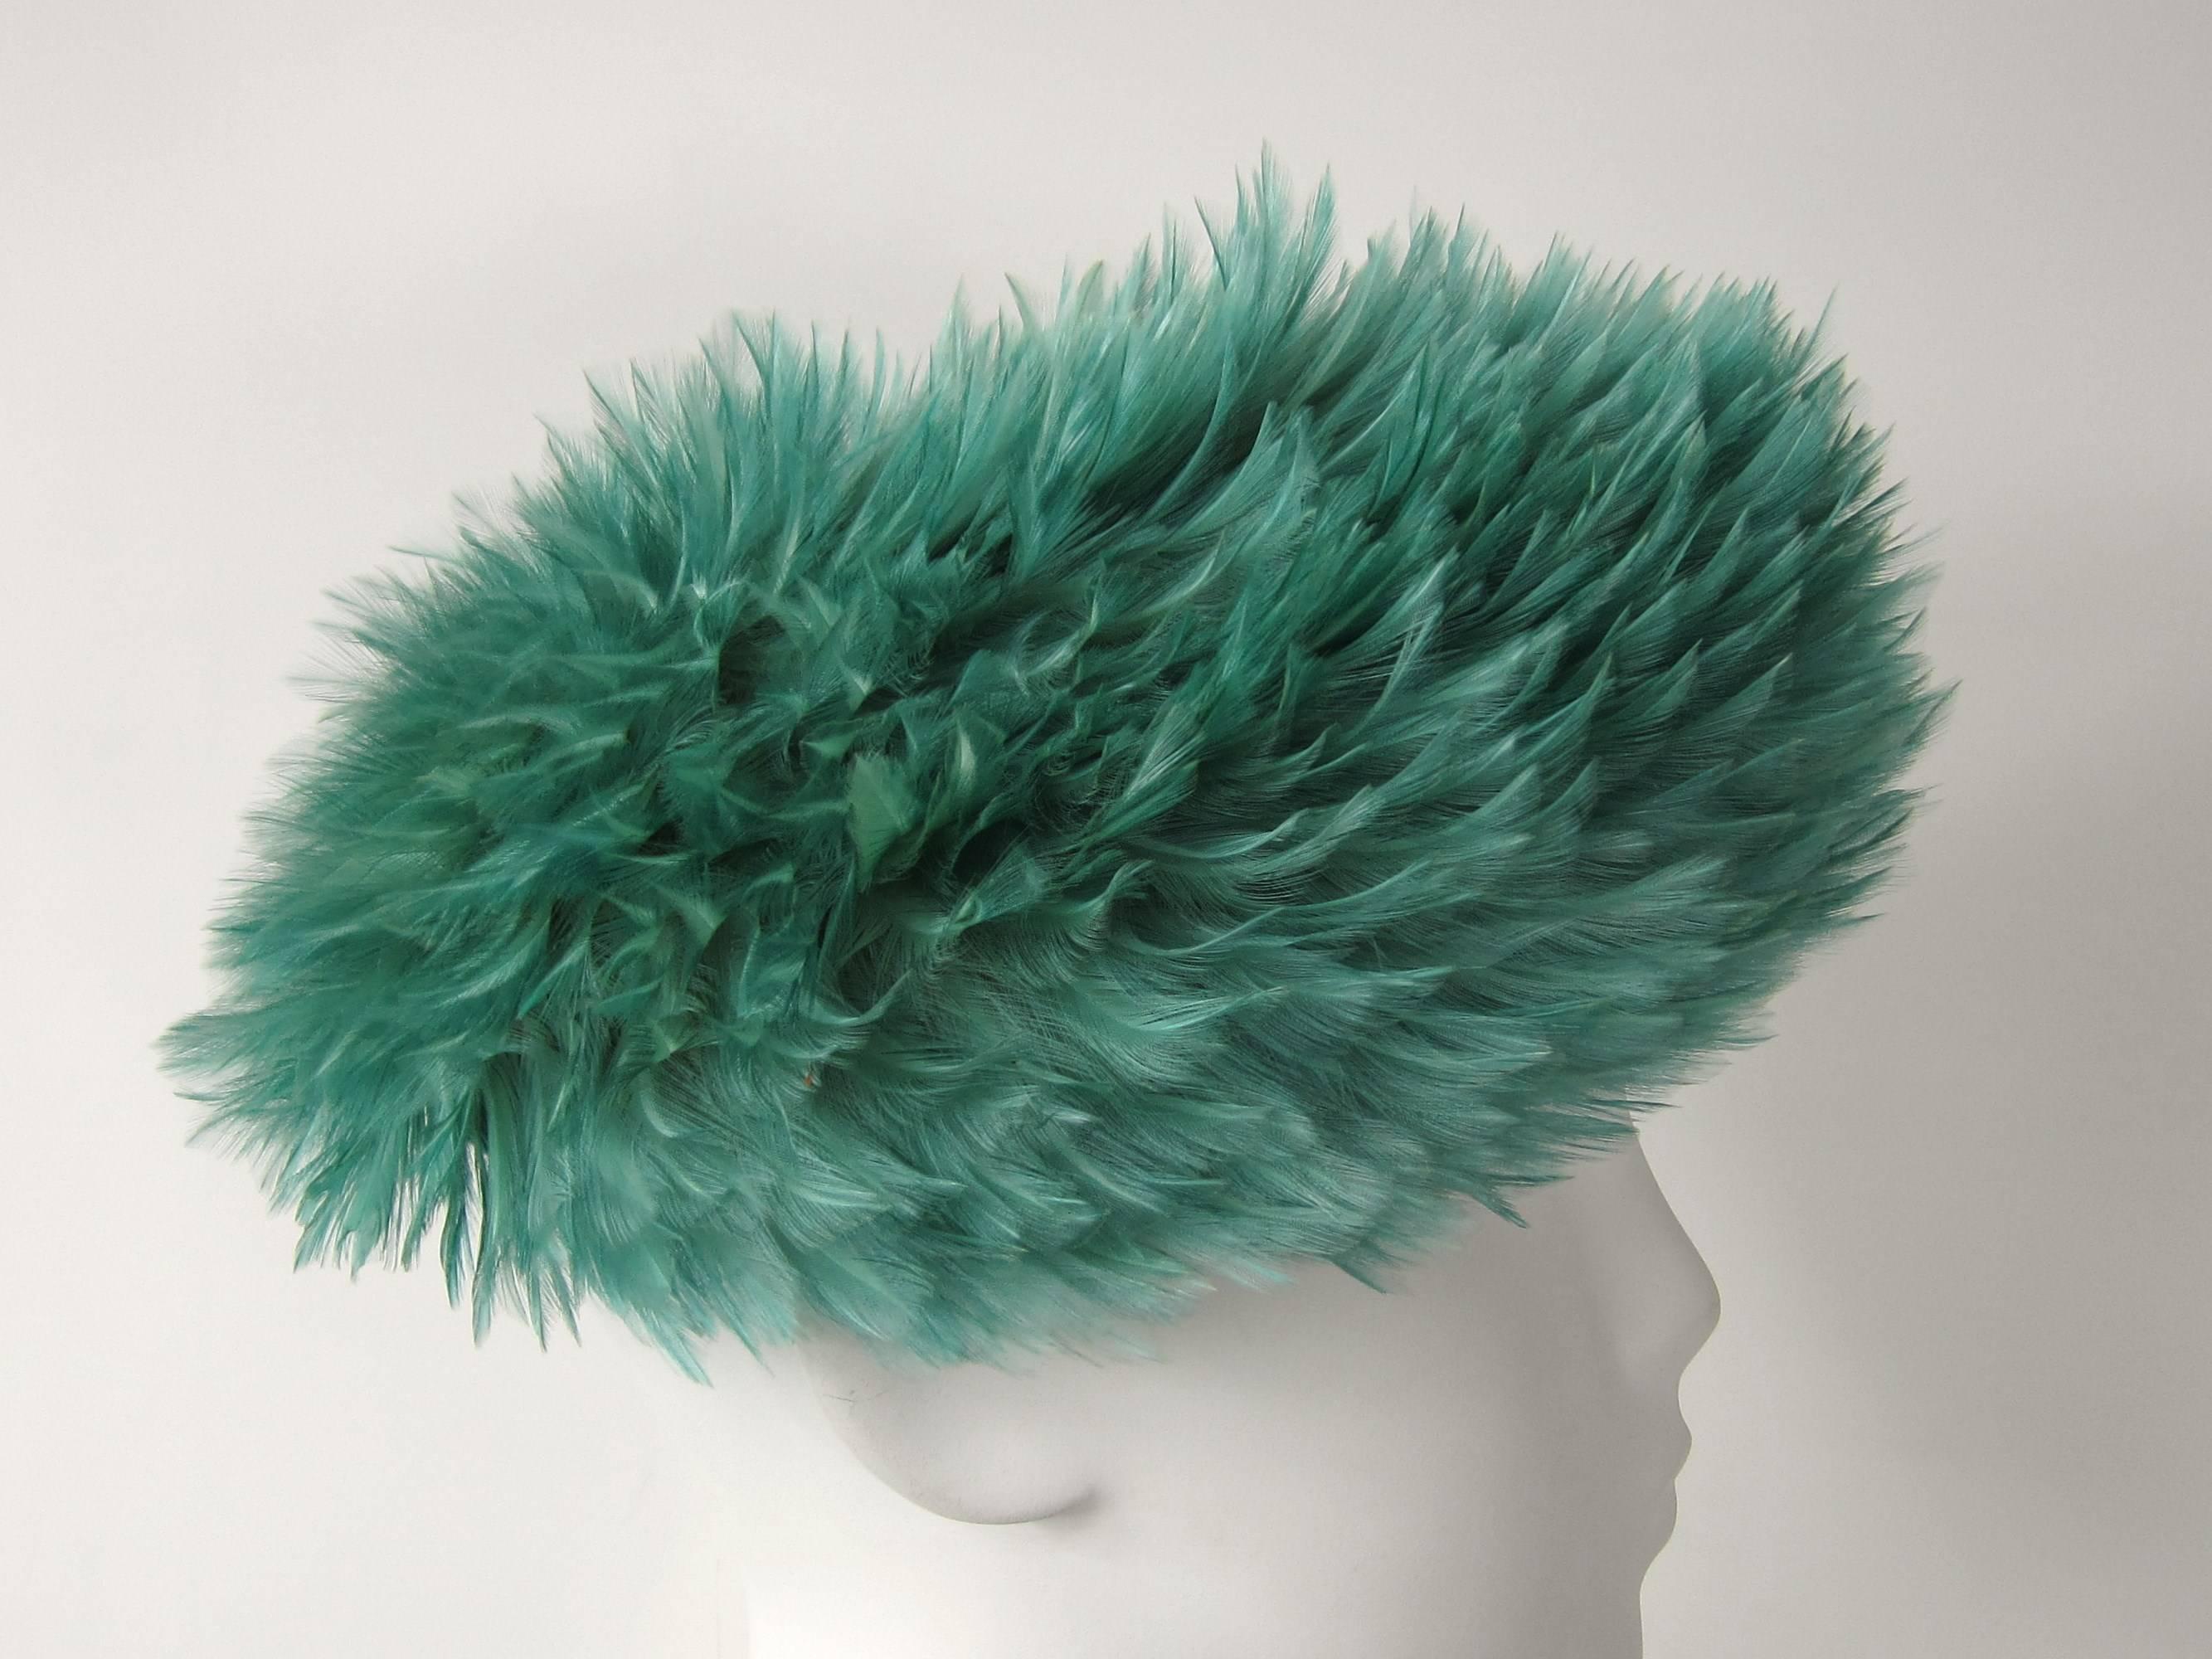 Wonderful vintage green feathered 1960s hat with a Stiffened tulle base. Measures 21 in diameter XS - Labeled De Pinna Salon ~ New York ~ Miami Beach ~ Please check our storefront for hundreds of items including New, Never worn vintage Jewelry as